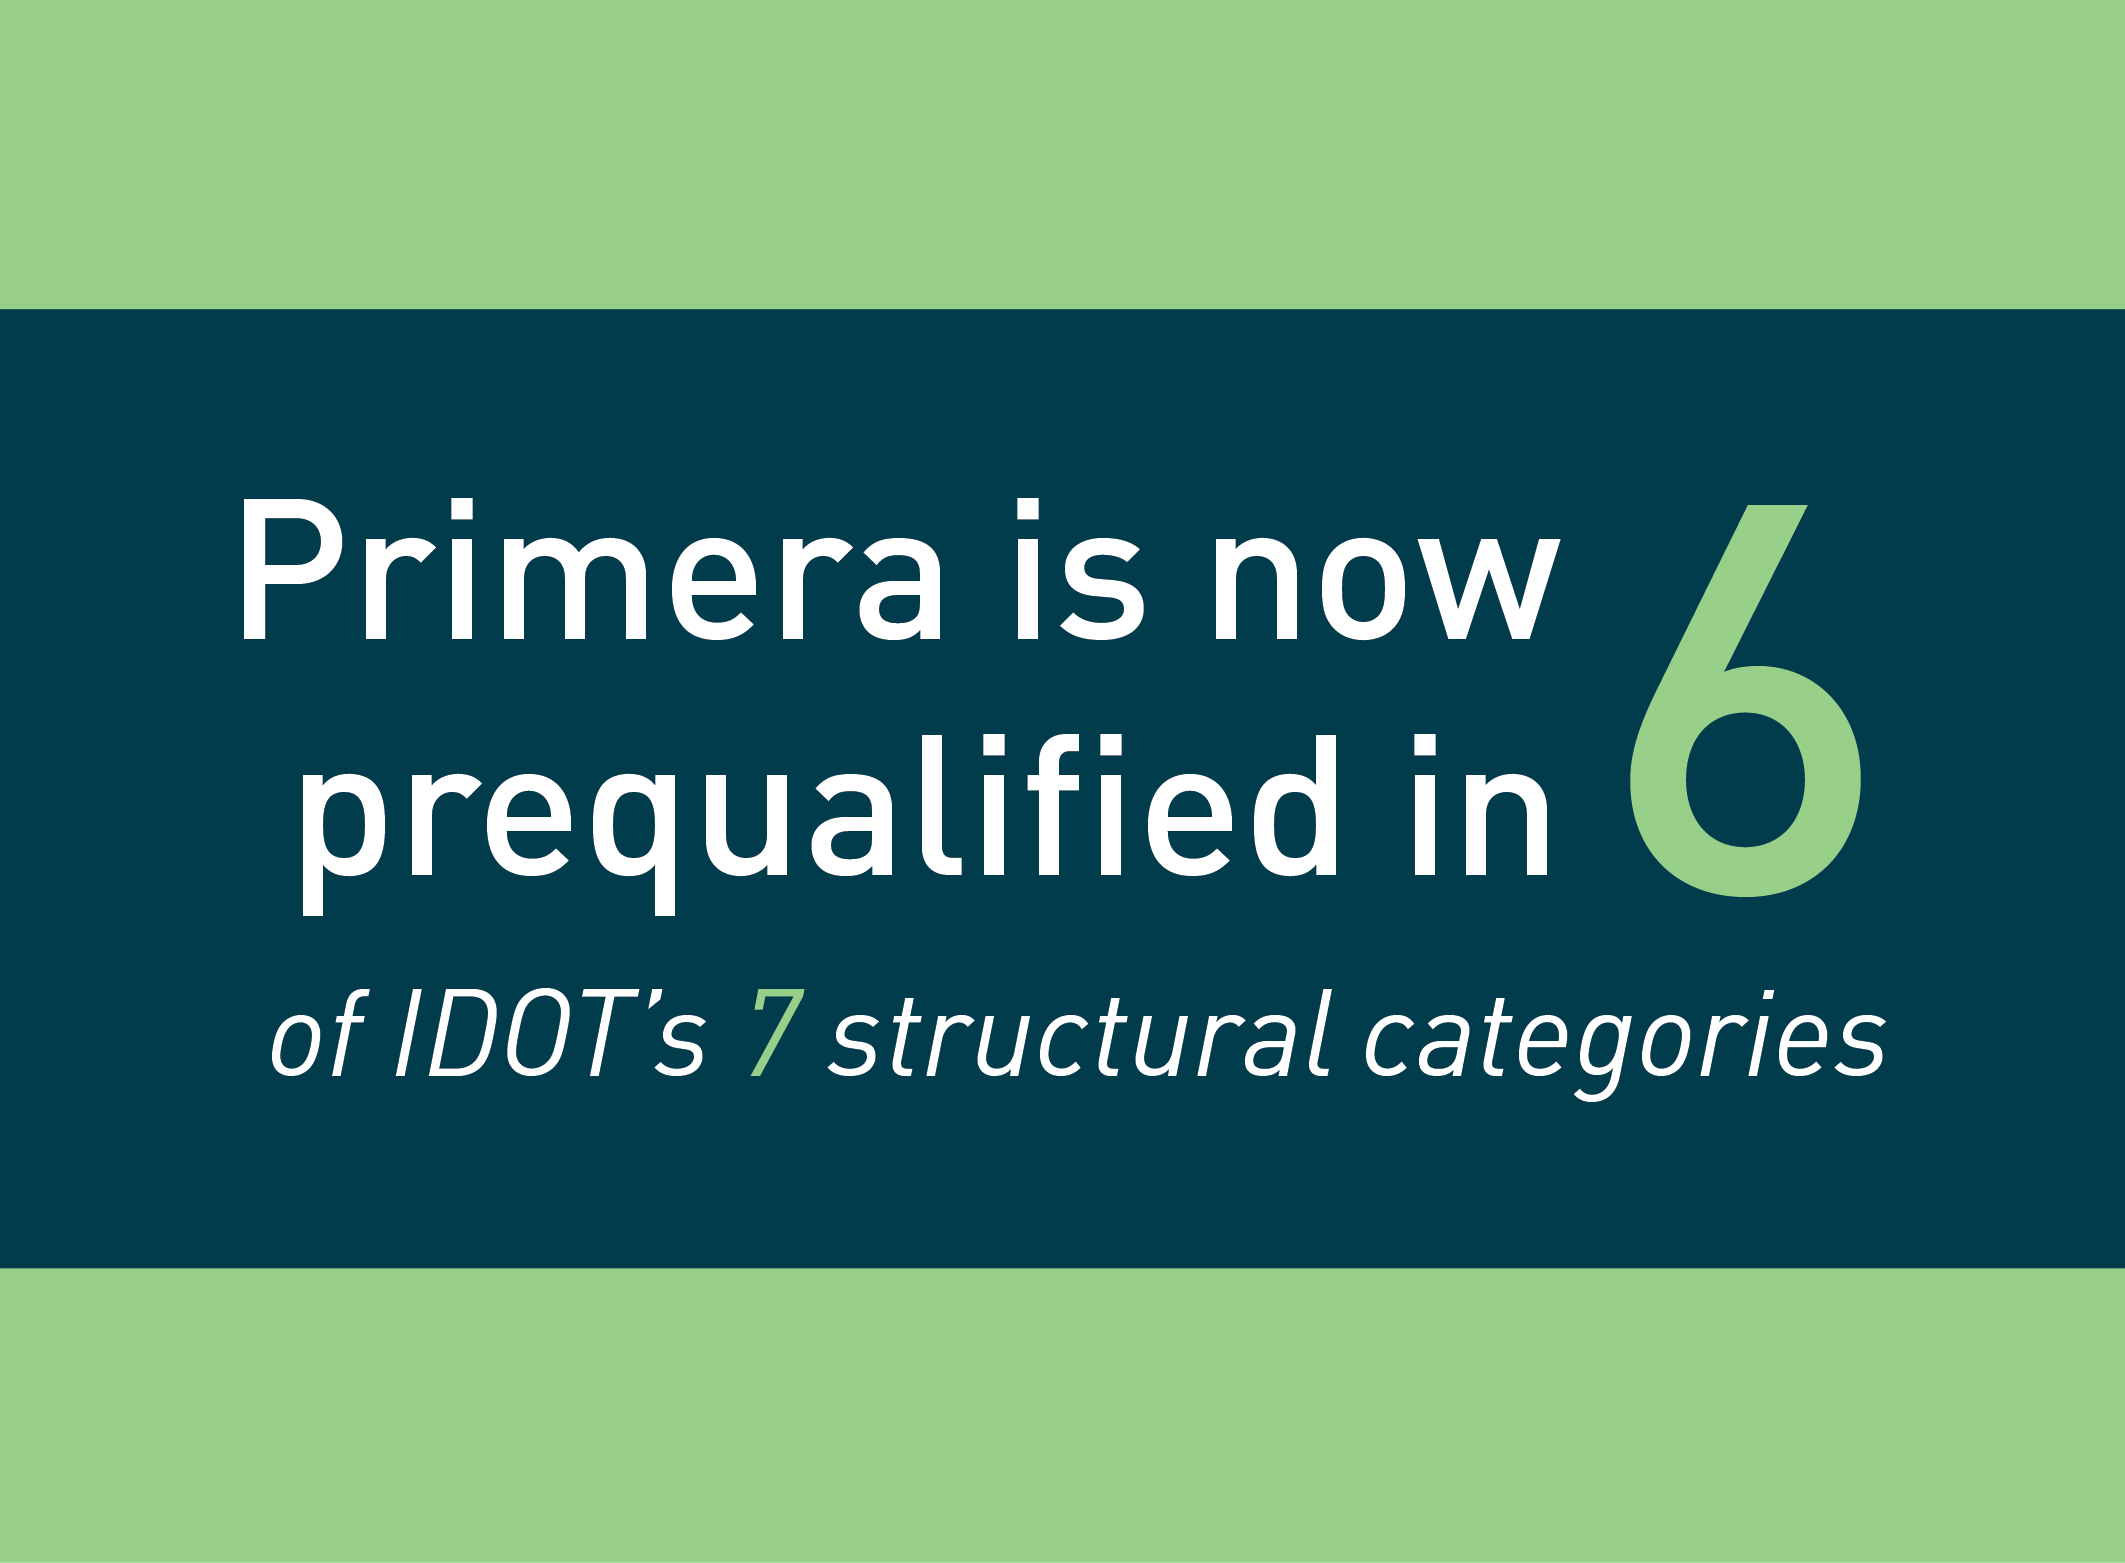 Primera Receives IDOT’s Structures – Highway: Complex Prequalification